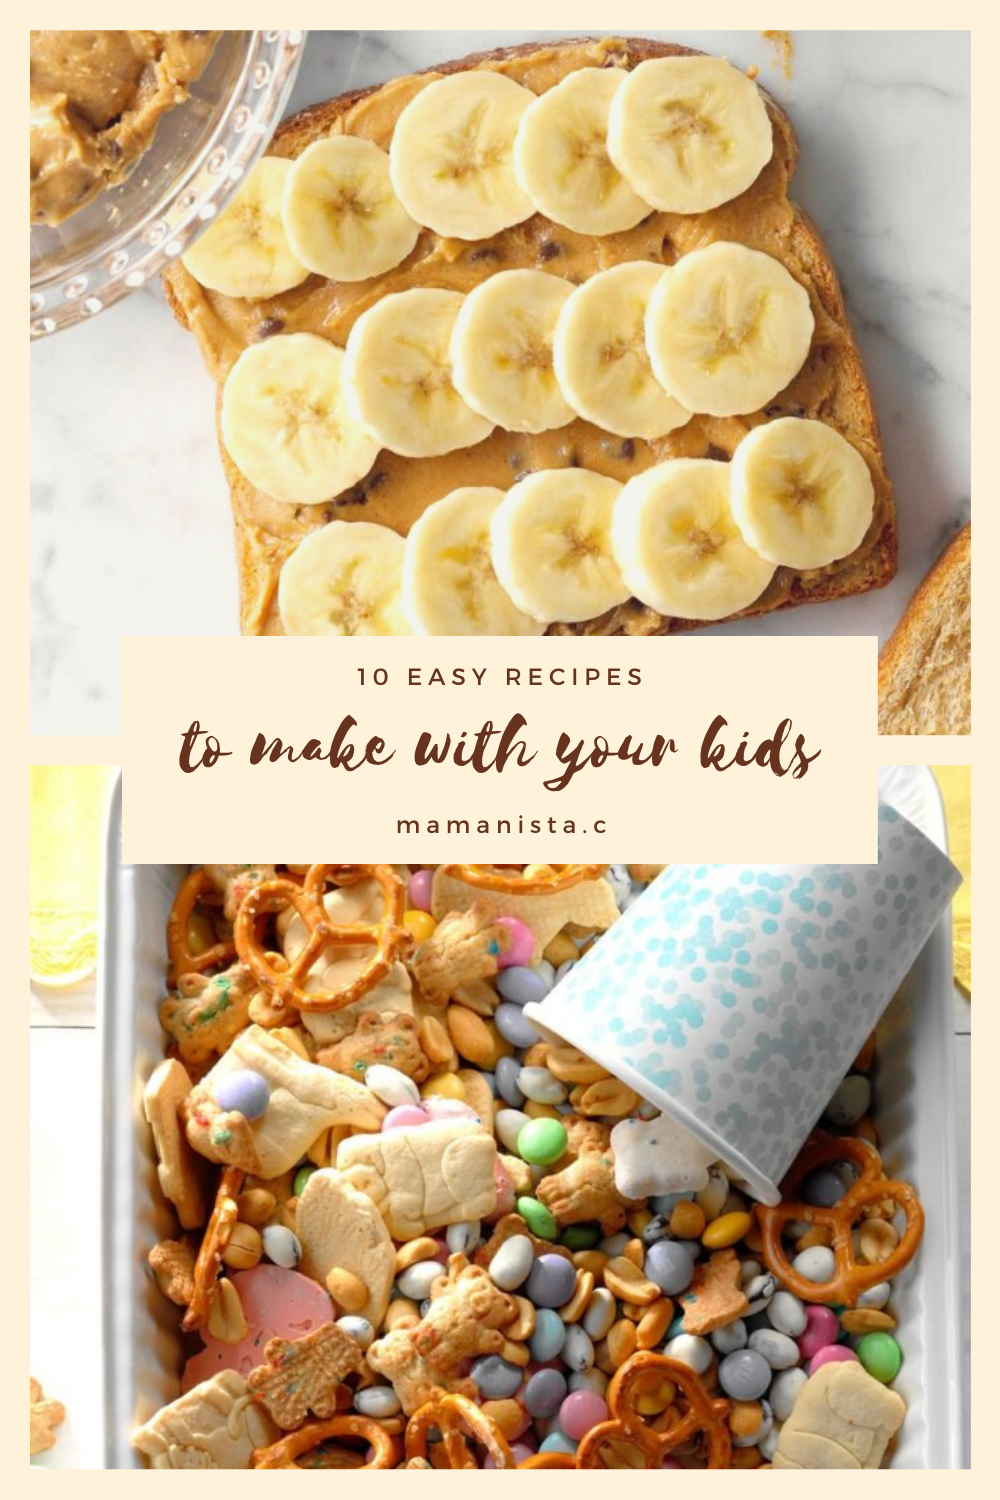 These 10 easy recipes to make with your kids will save you time and make for a fun and practical learning activity!